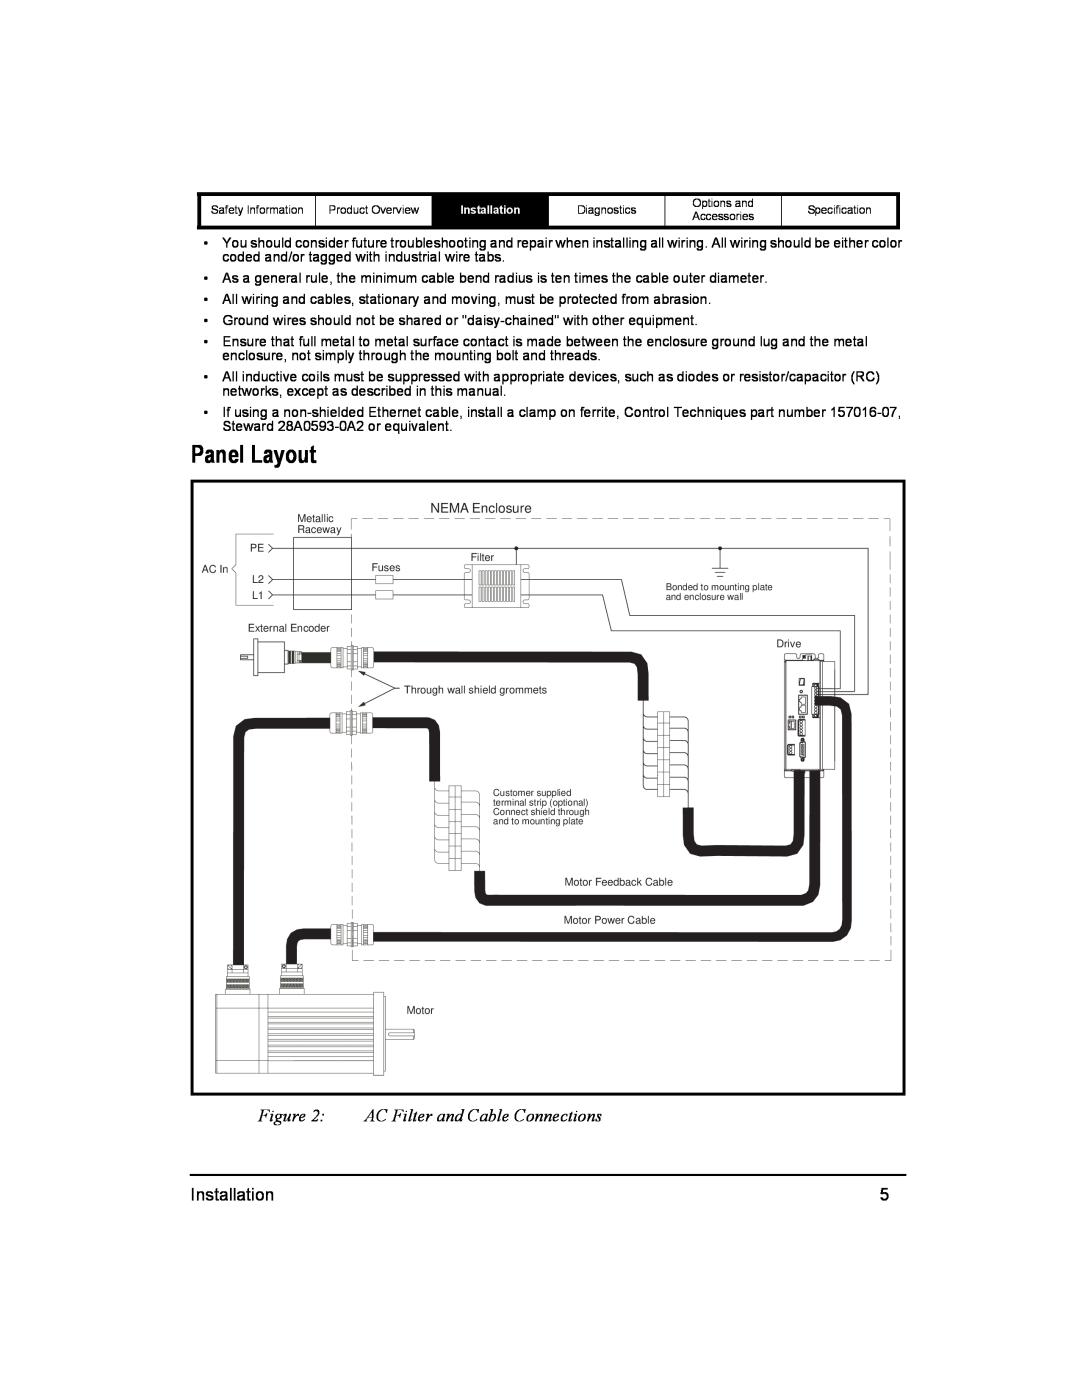 Emerson 400518-01 installation manual Panel Layout, AC Filter and Cable Connections 